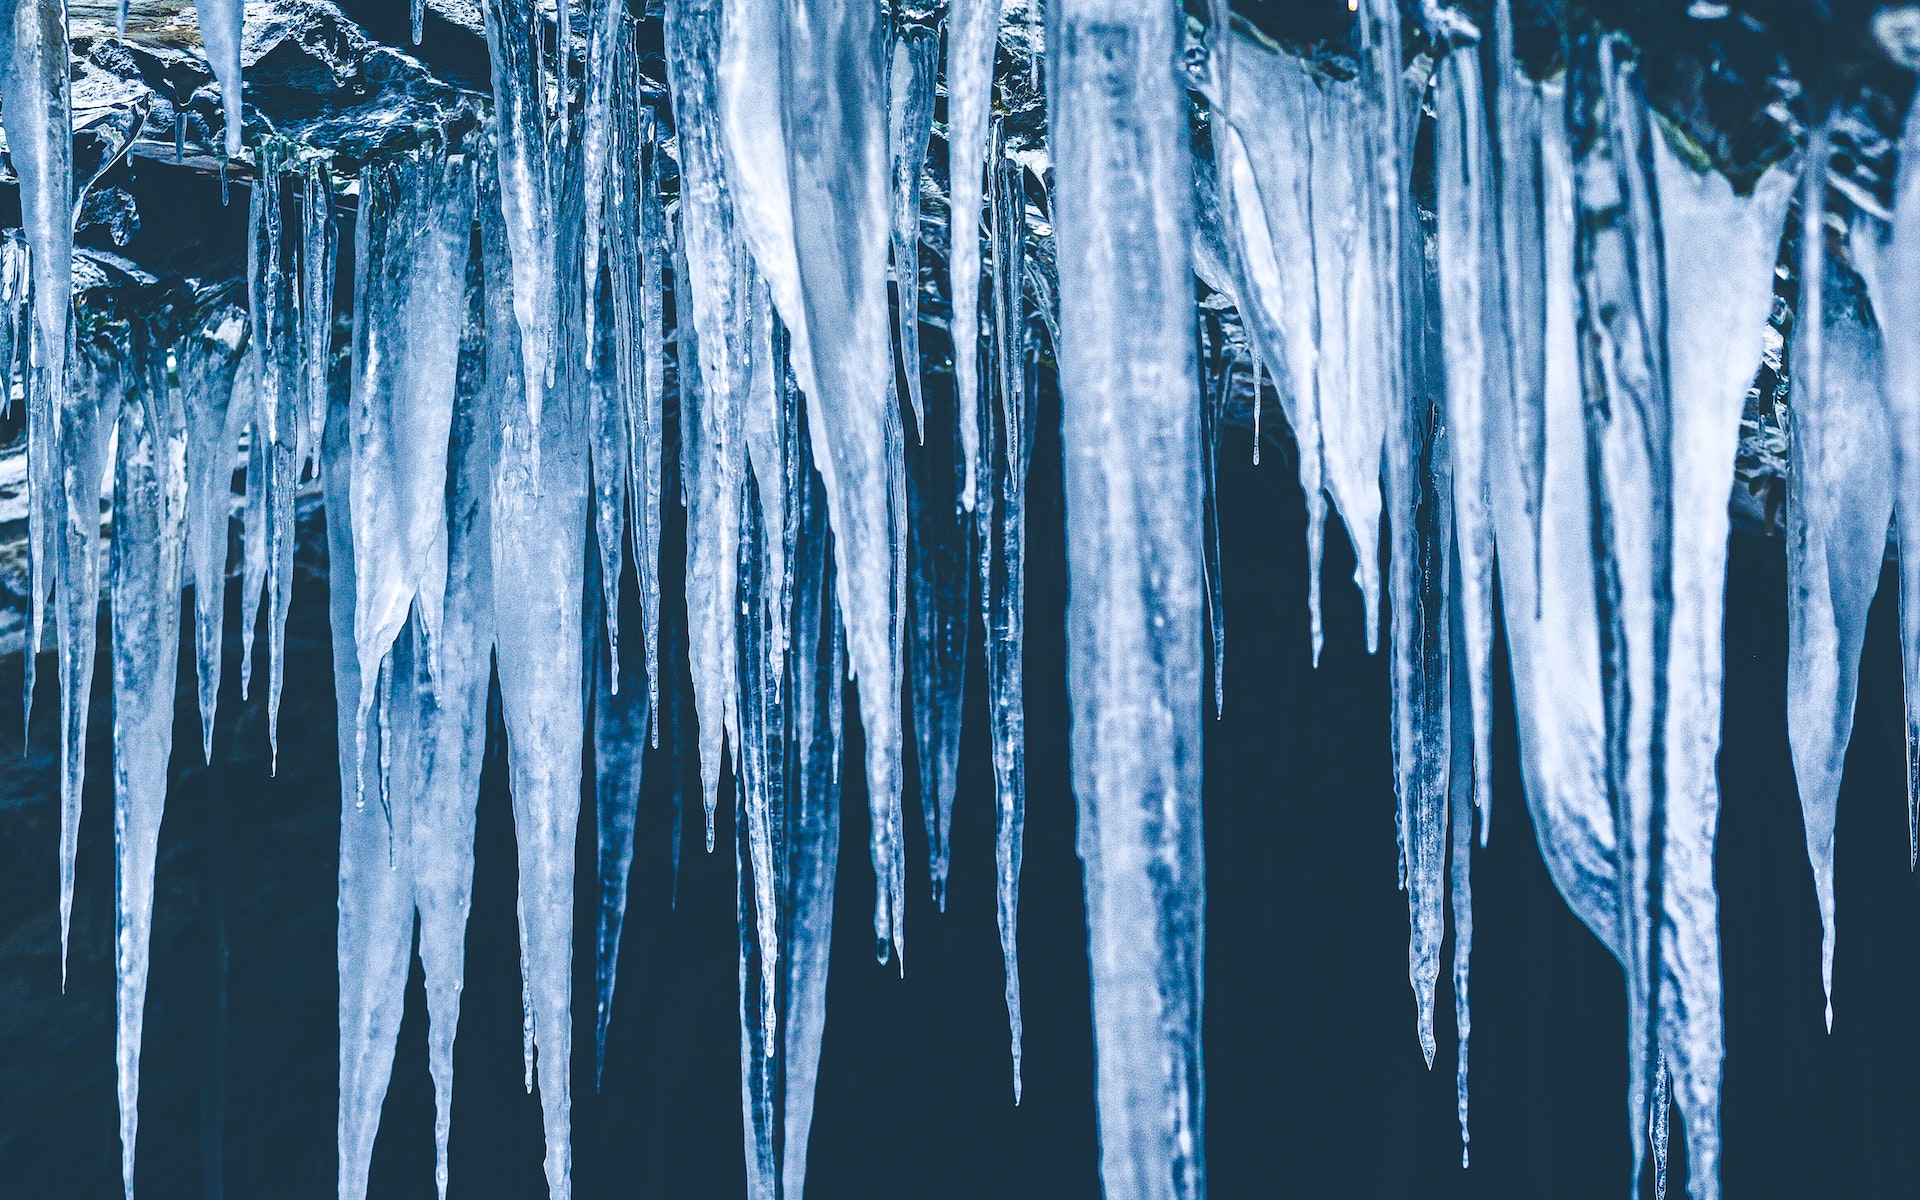 Cluster of icicles pictured in front of a dark blue background